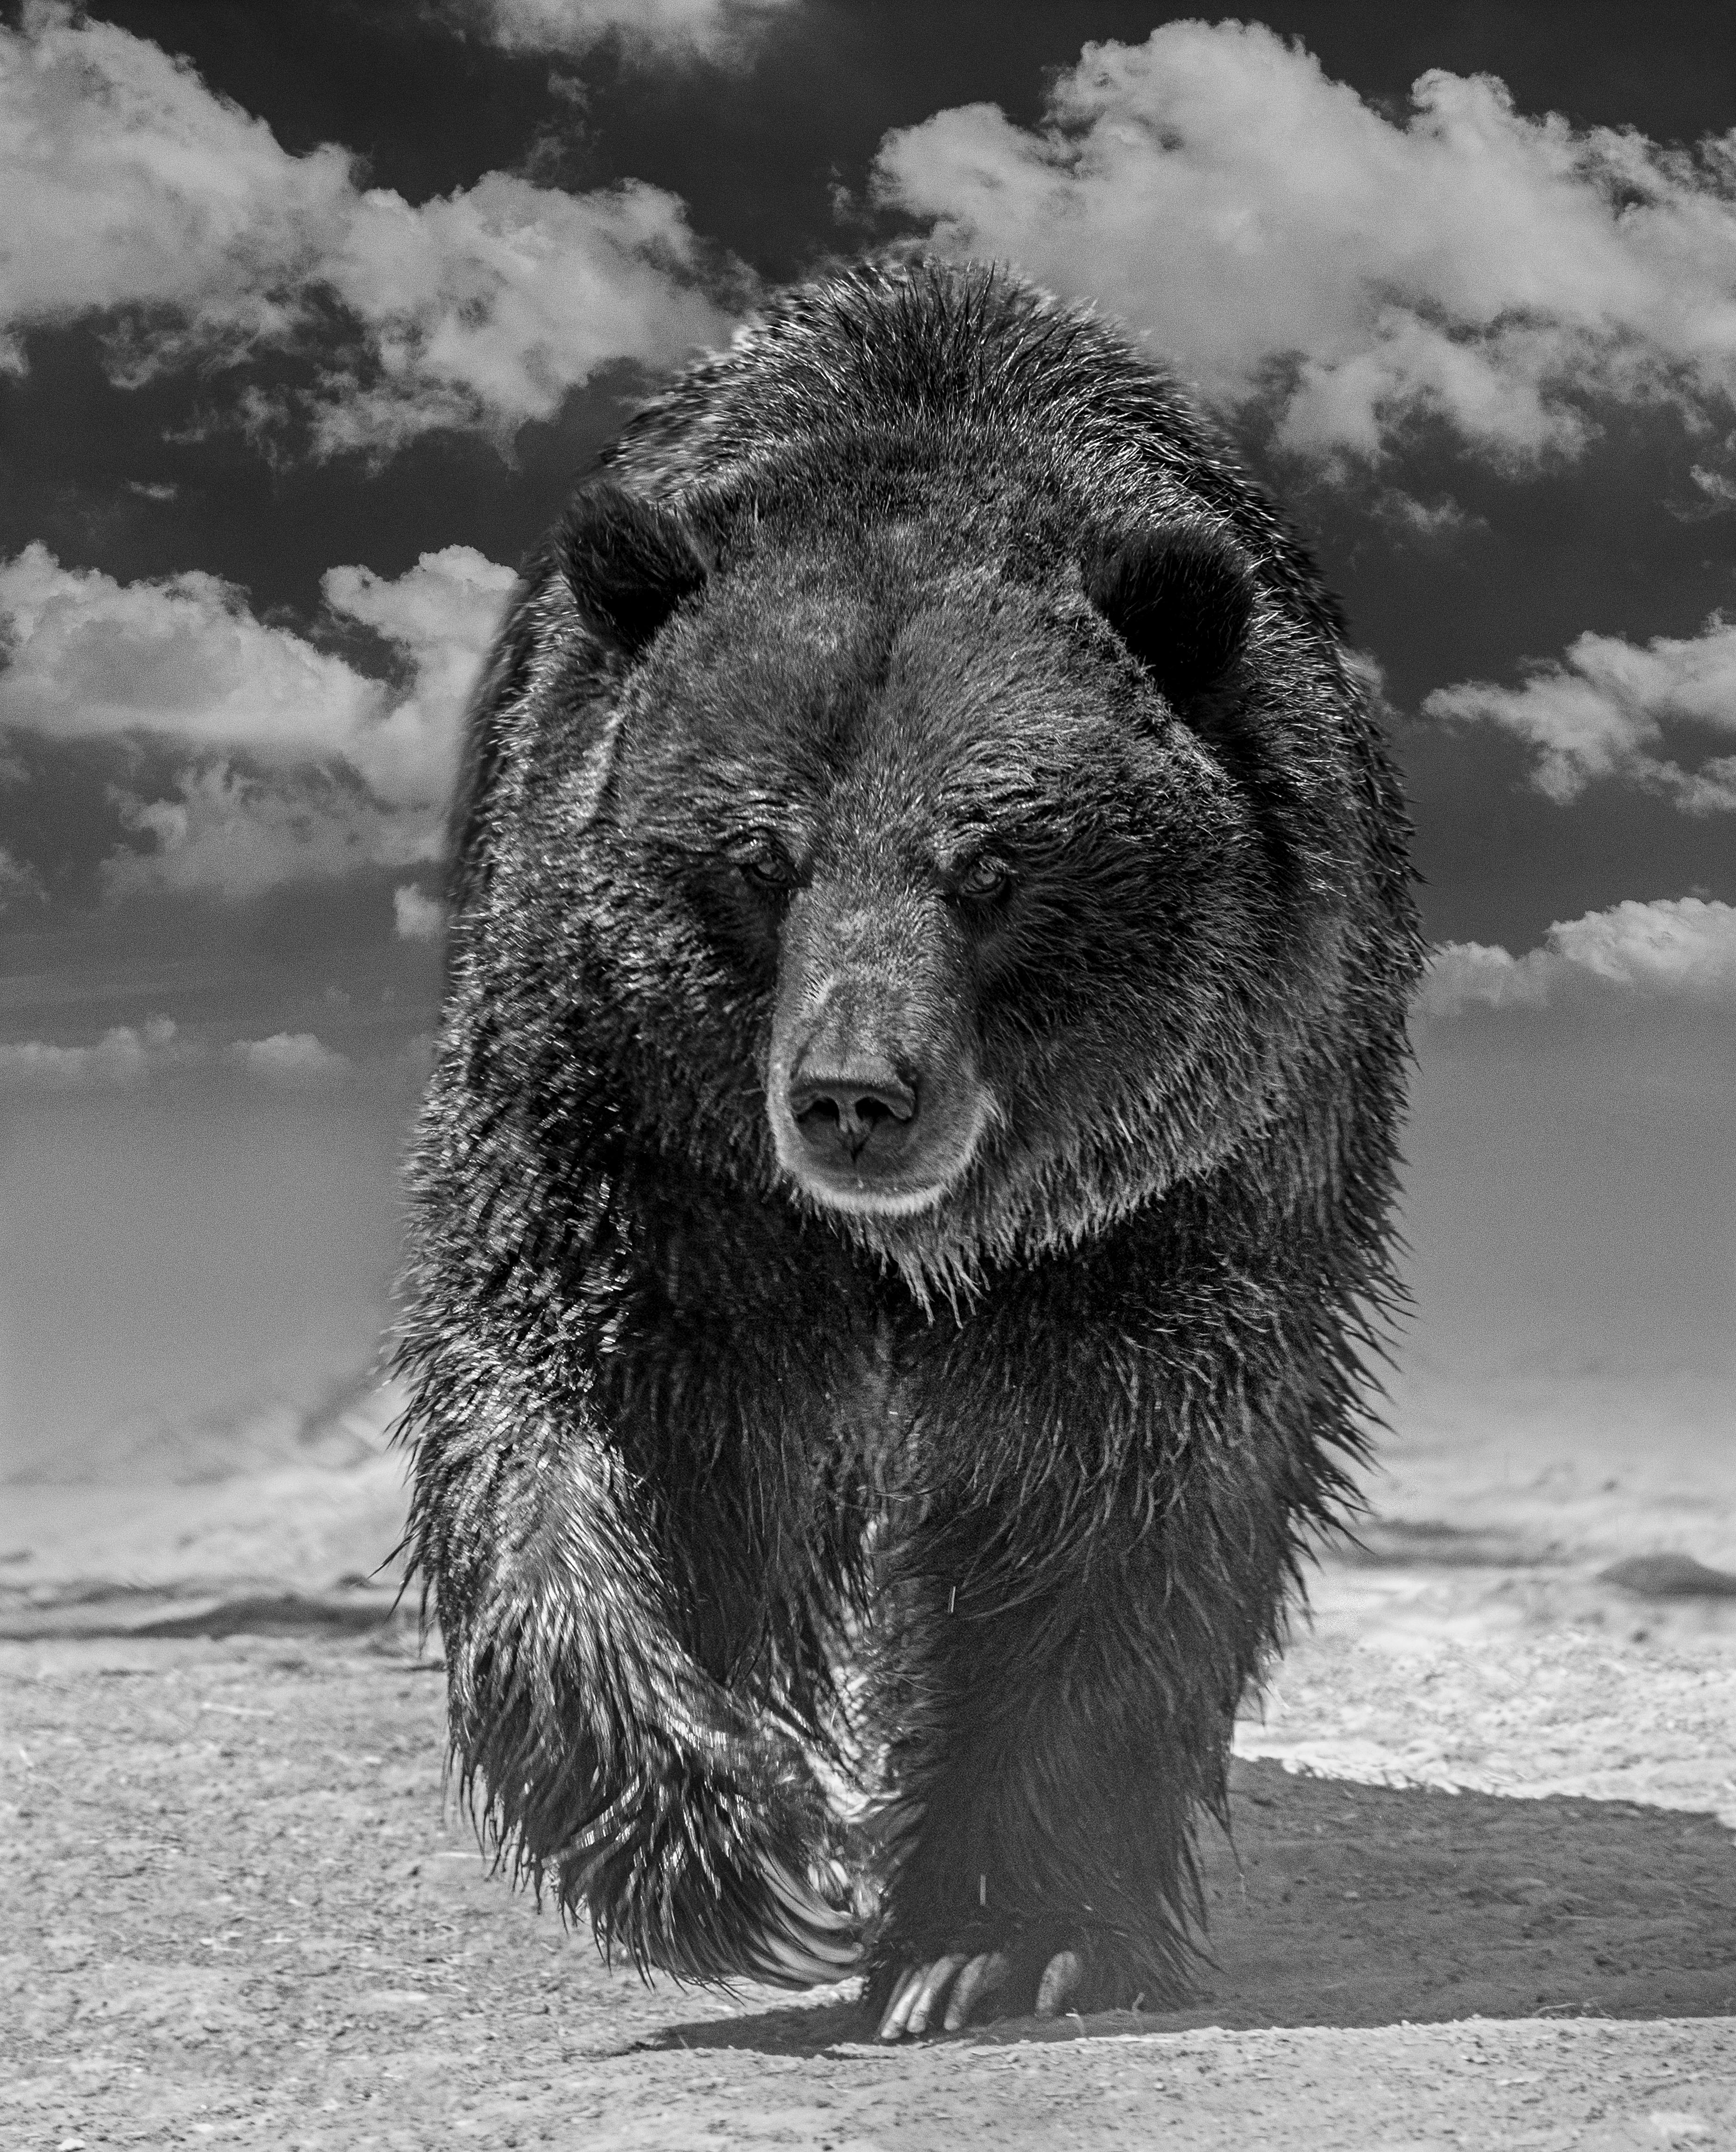 Grizzly Bear
Printed on archival paper using archival inks
UV Coated
40 x 28  Edition of 50. 
Signed by Shane
Framing available. Inquire for rates. 
Printed on archival paper using archival ink. 
Framing available. Inquire for rates.  

  Shane